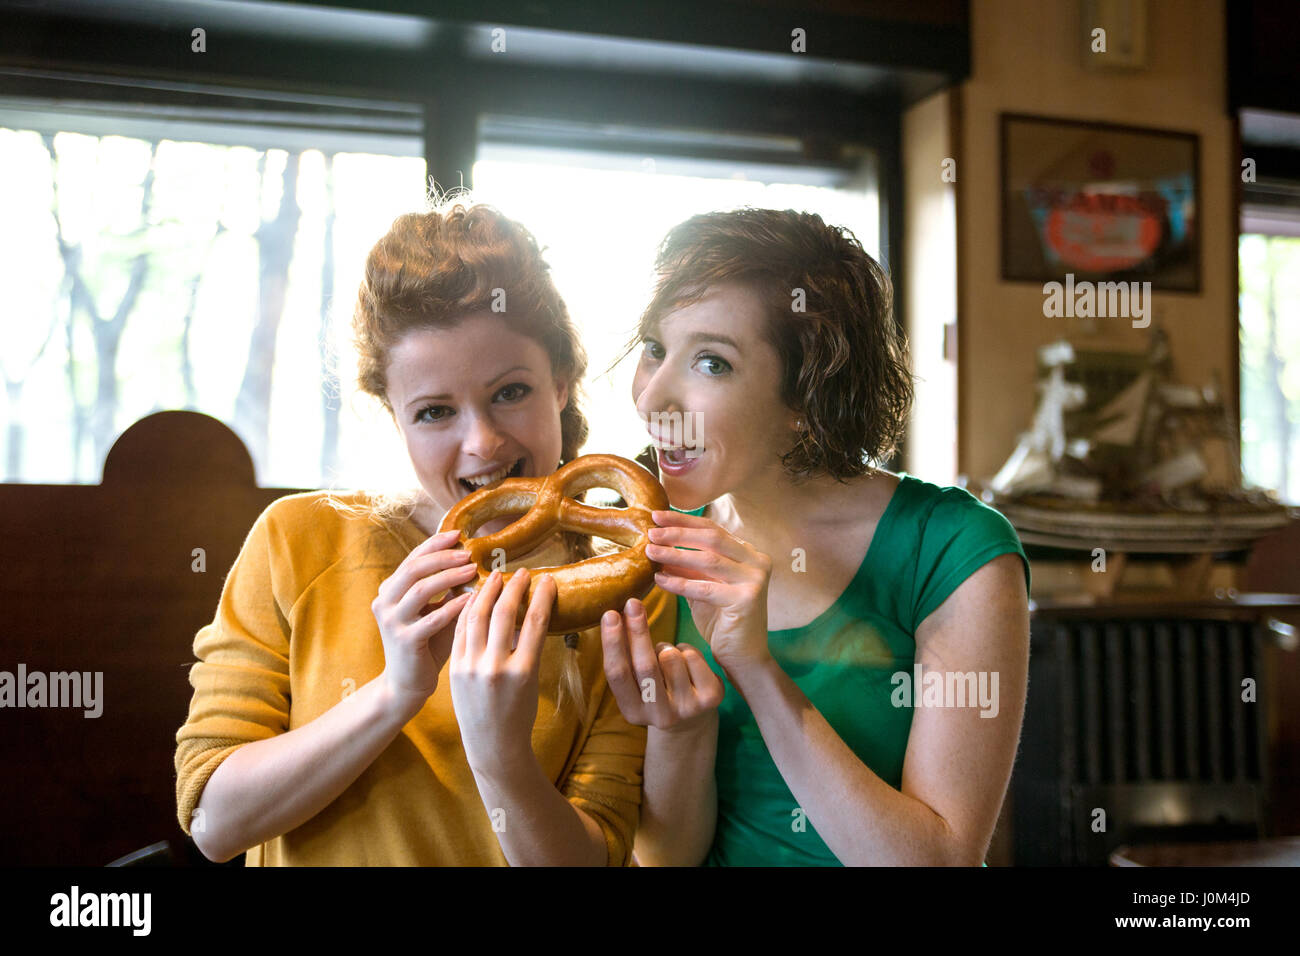 Two girlfriends eating pretzel, looking at camera indoor setting. Both are smiling and enjoying their time together Stock Photo